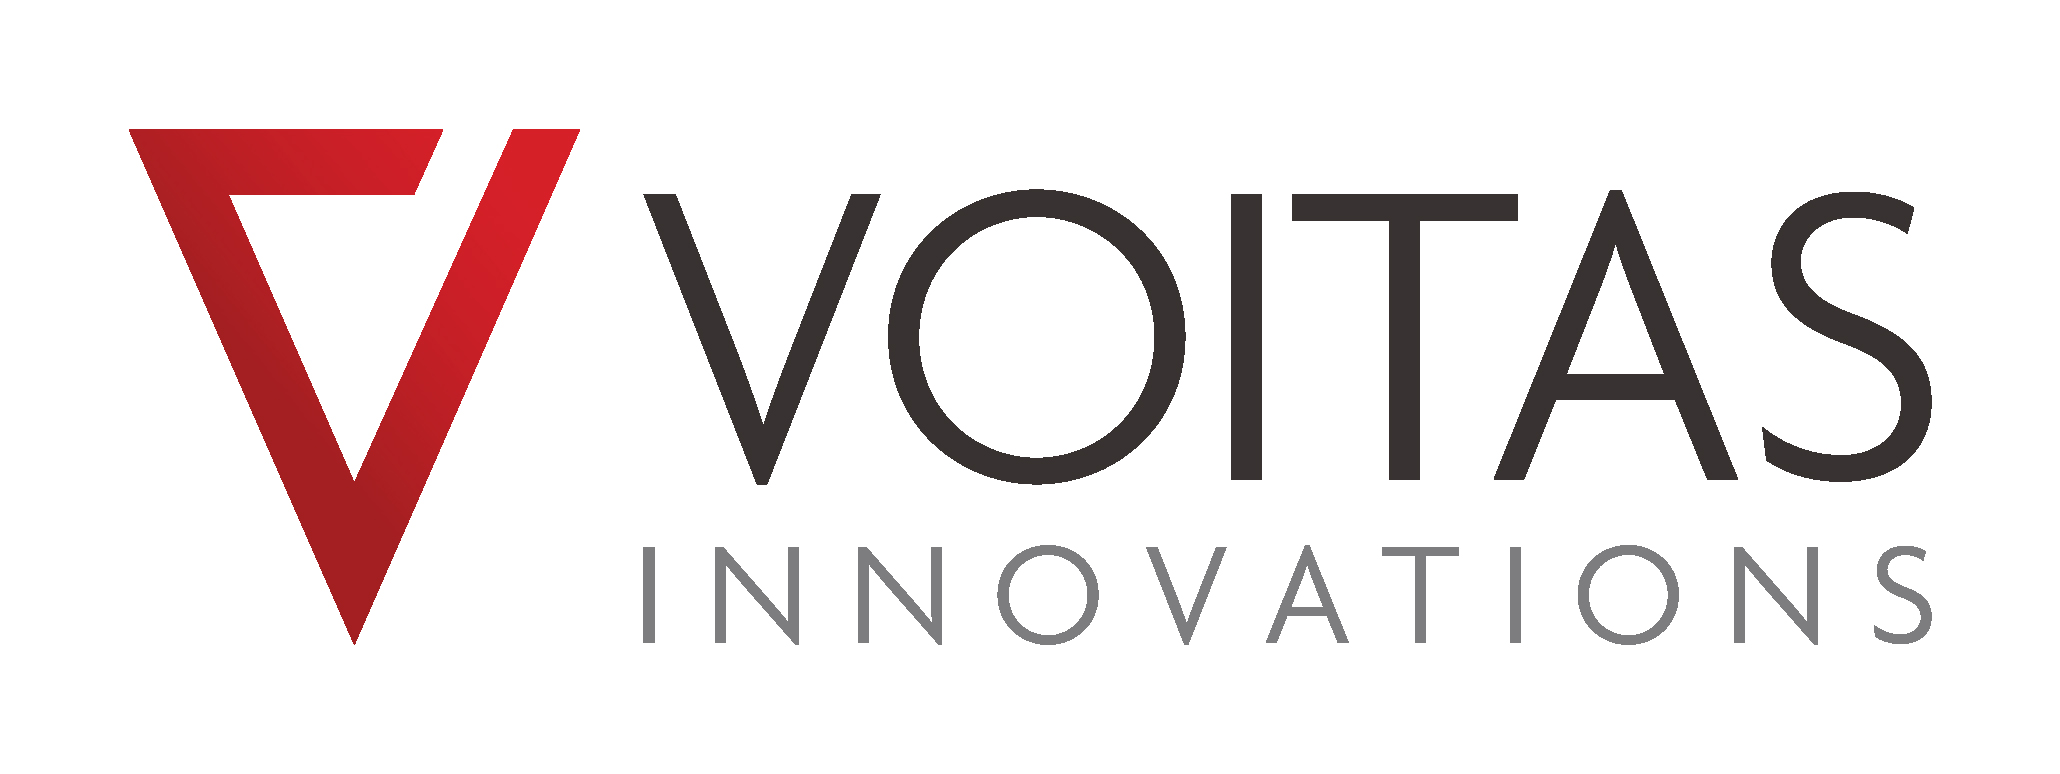 Profile image for VOITAS Innovations GmbH